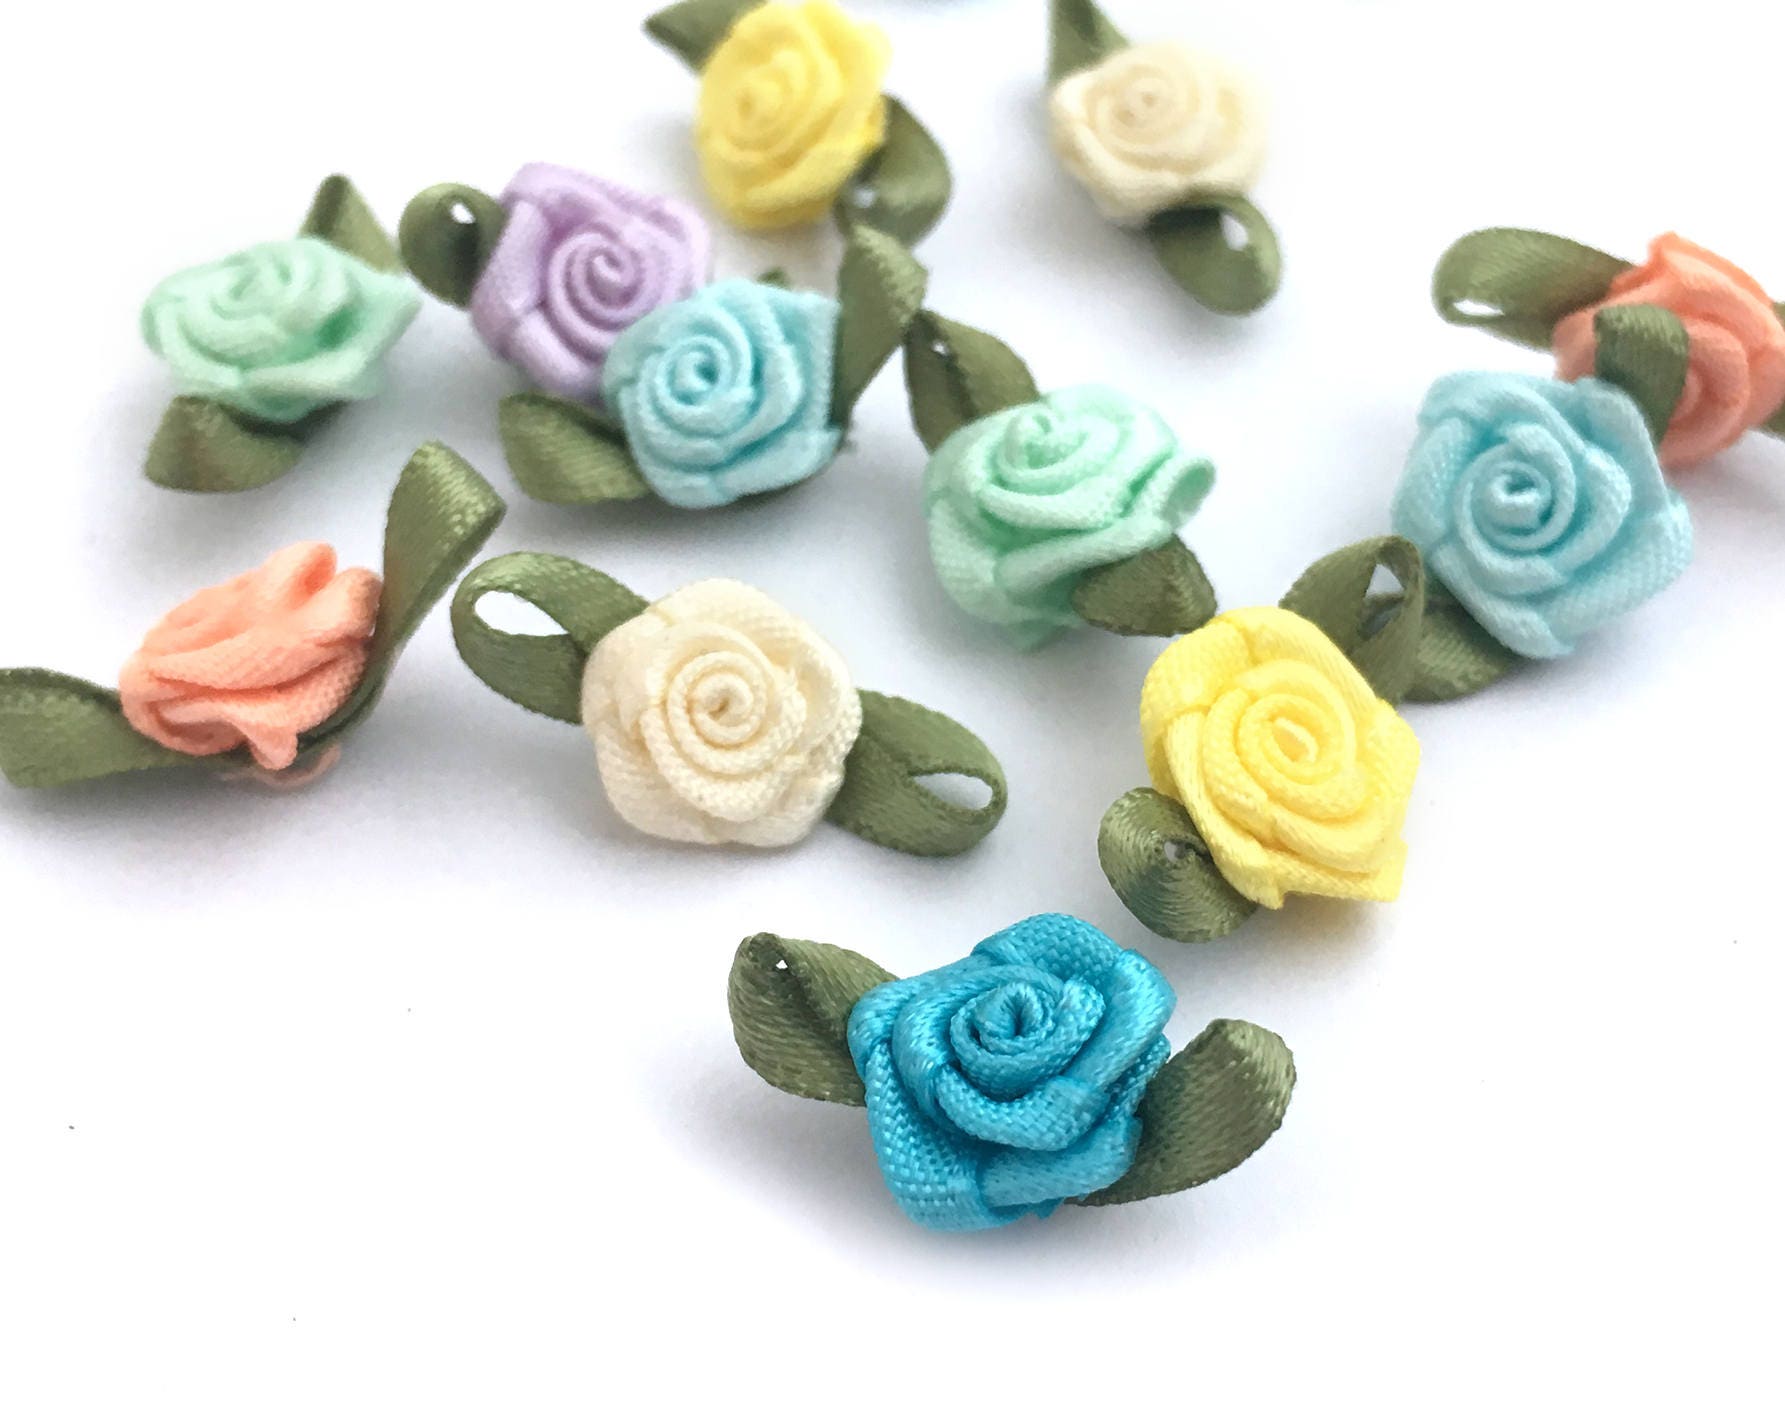 150 Pieces Satin Ribbon Flowers Small Flowers for Crafts 1.2 Inch Mini  Fabric Flowers Multicolor Daisy Flowers with Rhinestones Satin Ribbon Bows  for